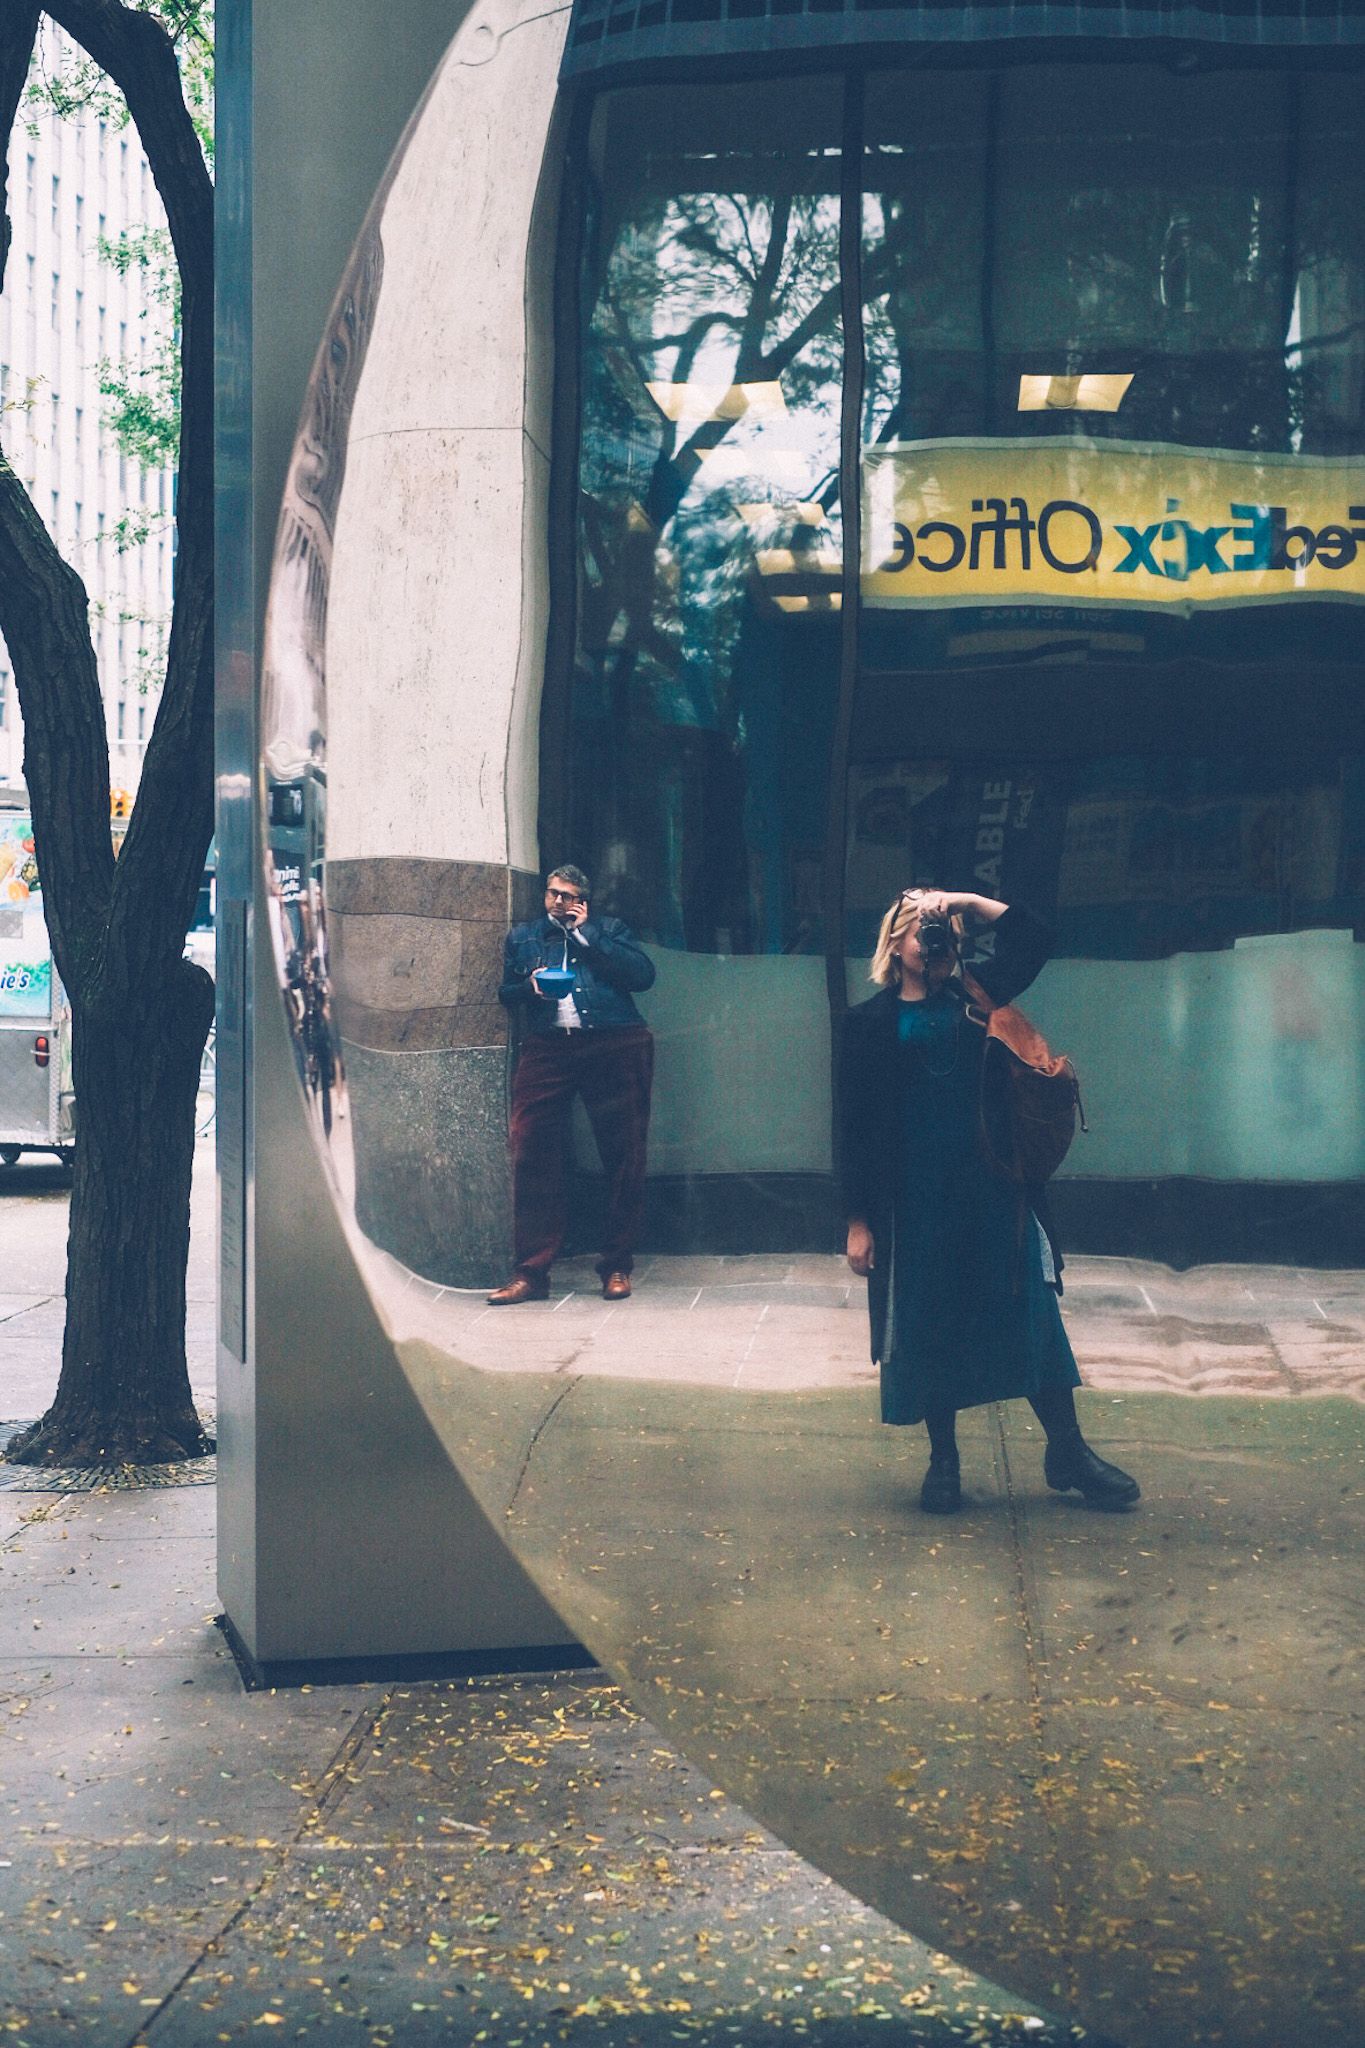 A woman takes a self portrait in a reflective sculpture in downtown New York.